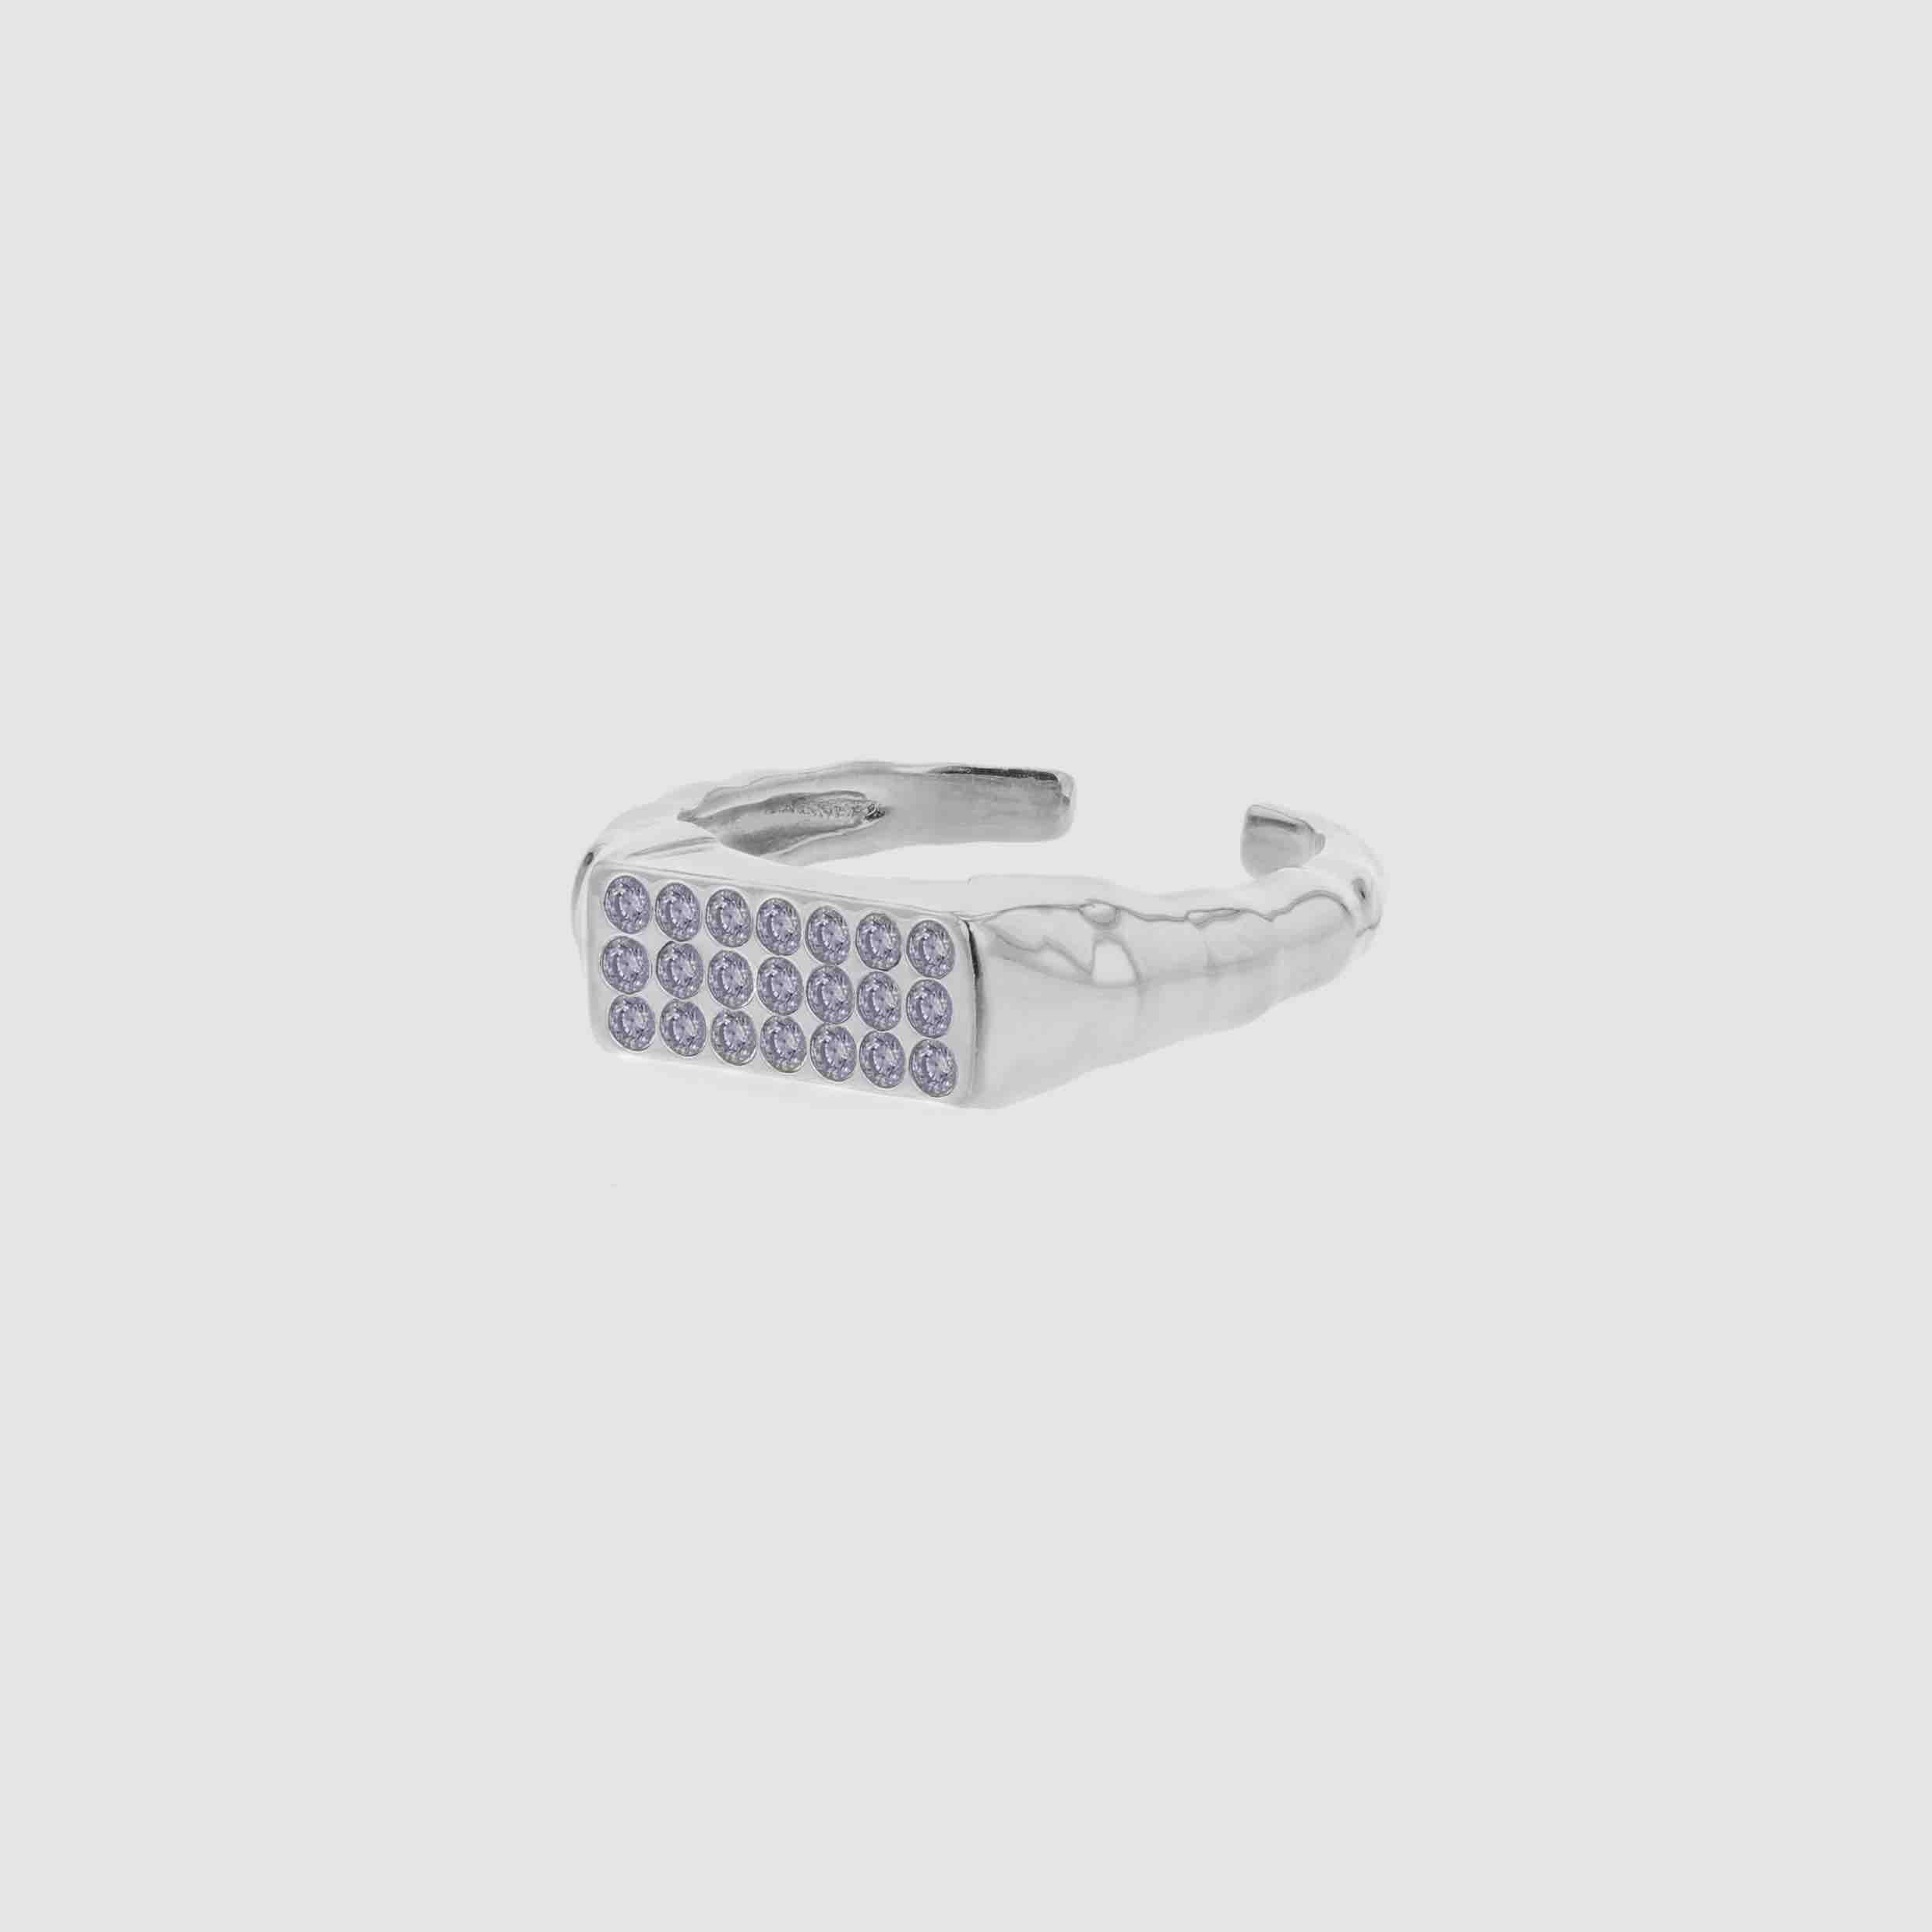 Bedazzeled ring lavender made in recycled silver from Hasla Jewelry Ring fra Hasla norsk design